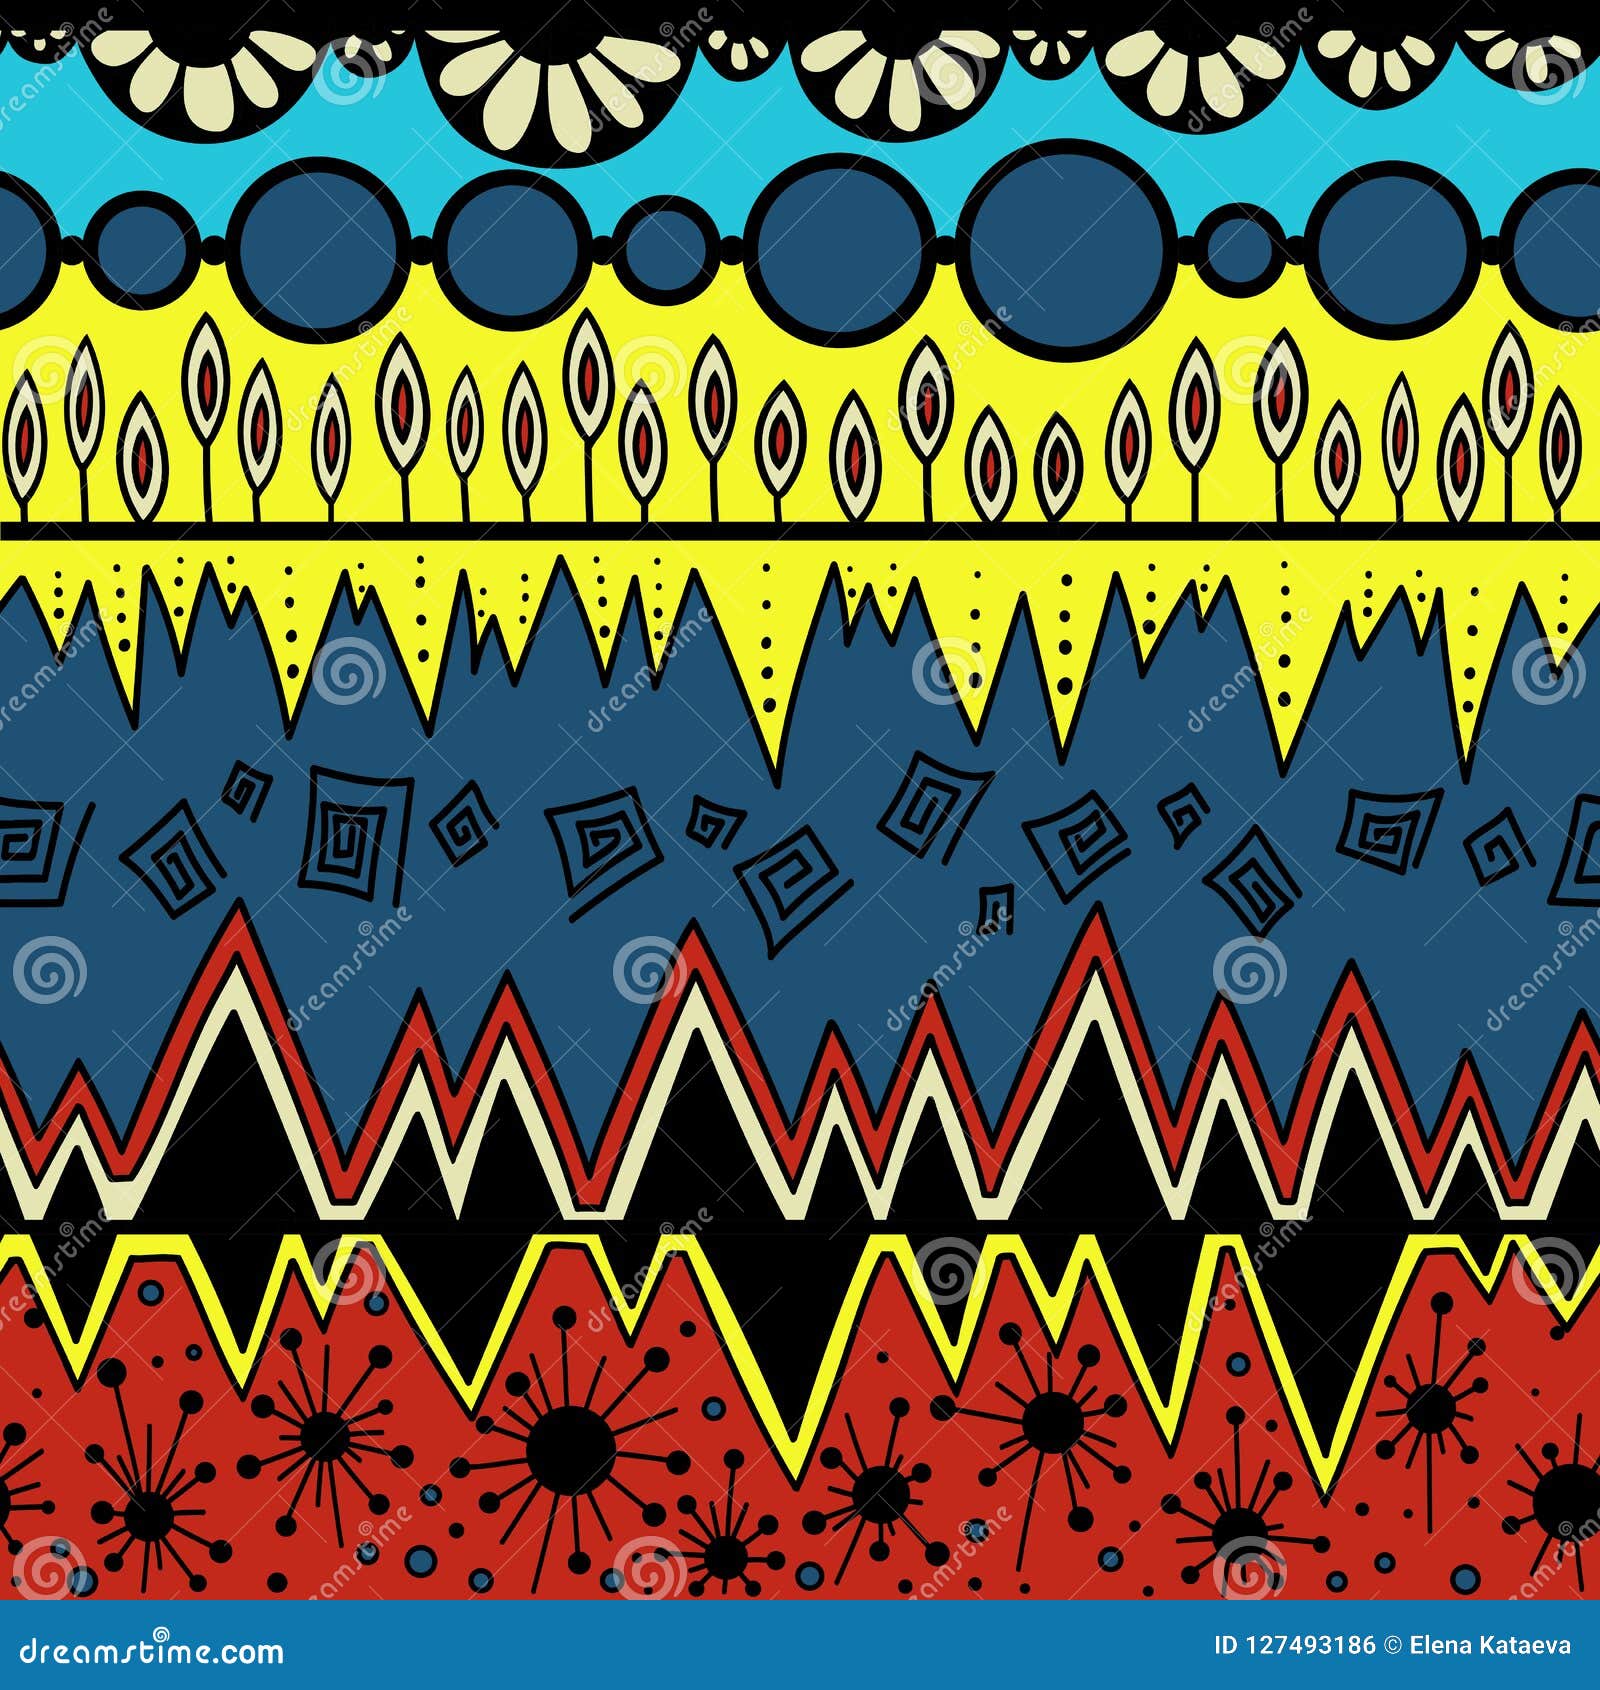 https://thumbs.dreamstime.com/z/africa-pattern-colormulticolor-tribal-vector-seamless-pattern-aztec-fancy-abstract-geometric-art-print-ethnic-hipster-multicolor-127493186.jpg